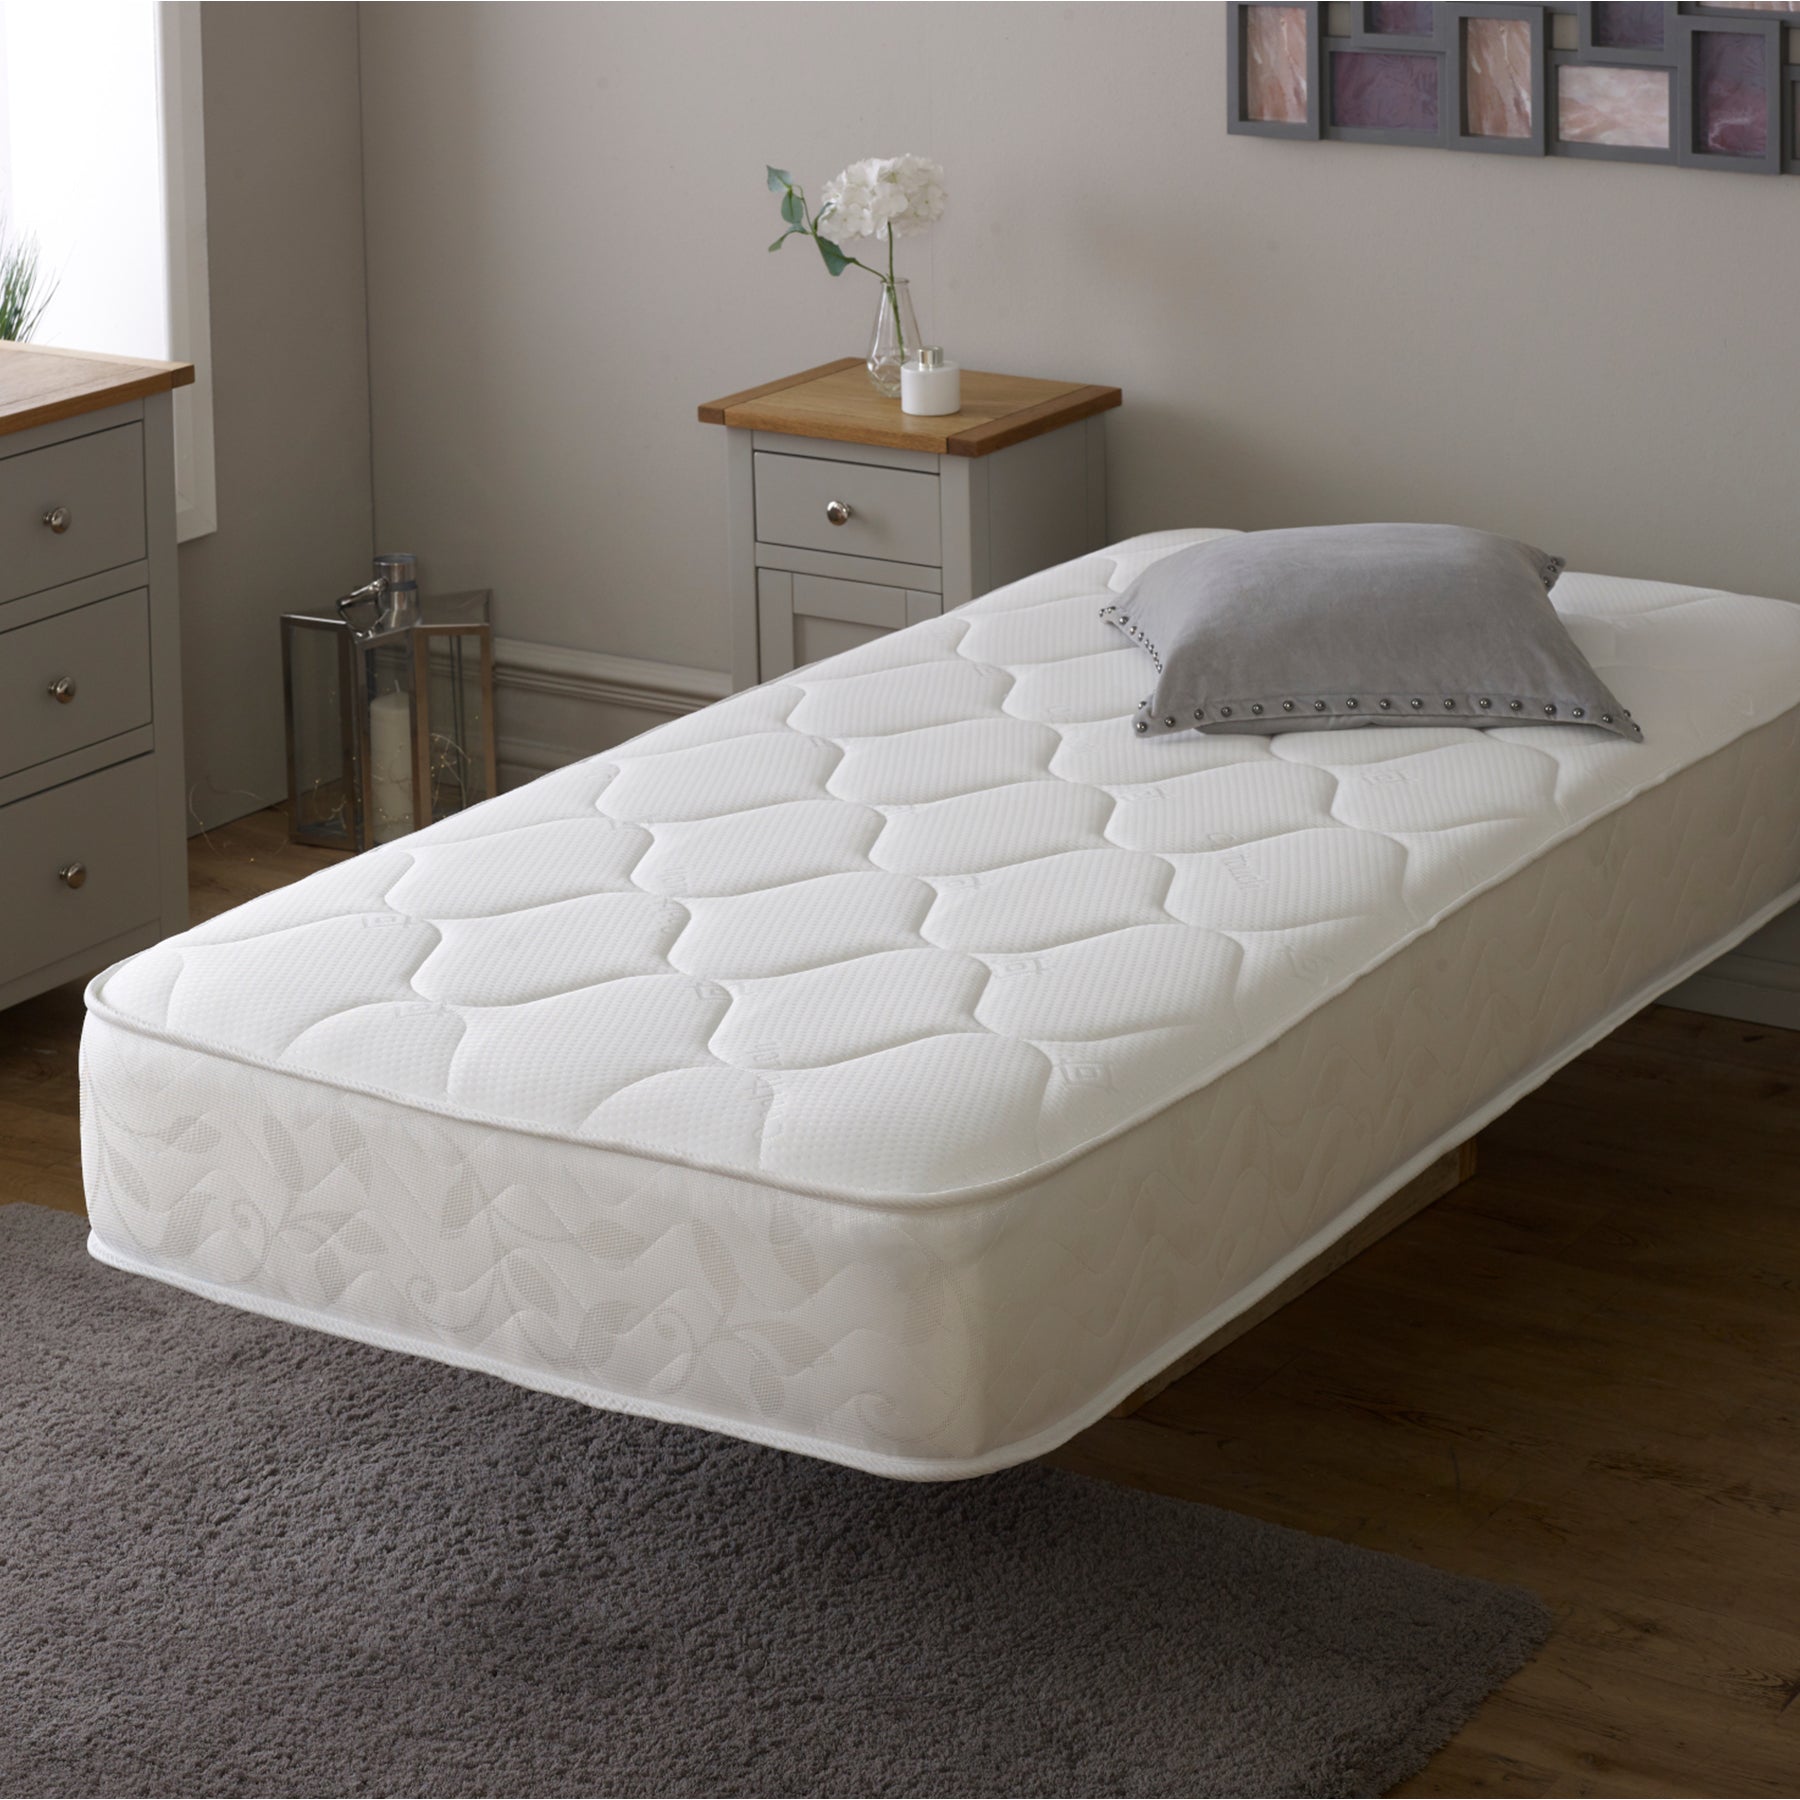 Starlight Beds™ | Spring & Memory Fibre Mattress with a Cool Touch Cover